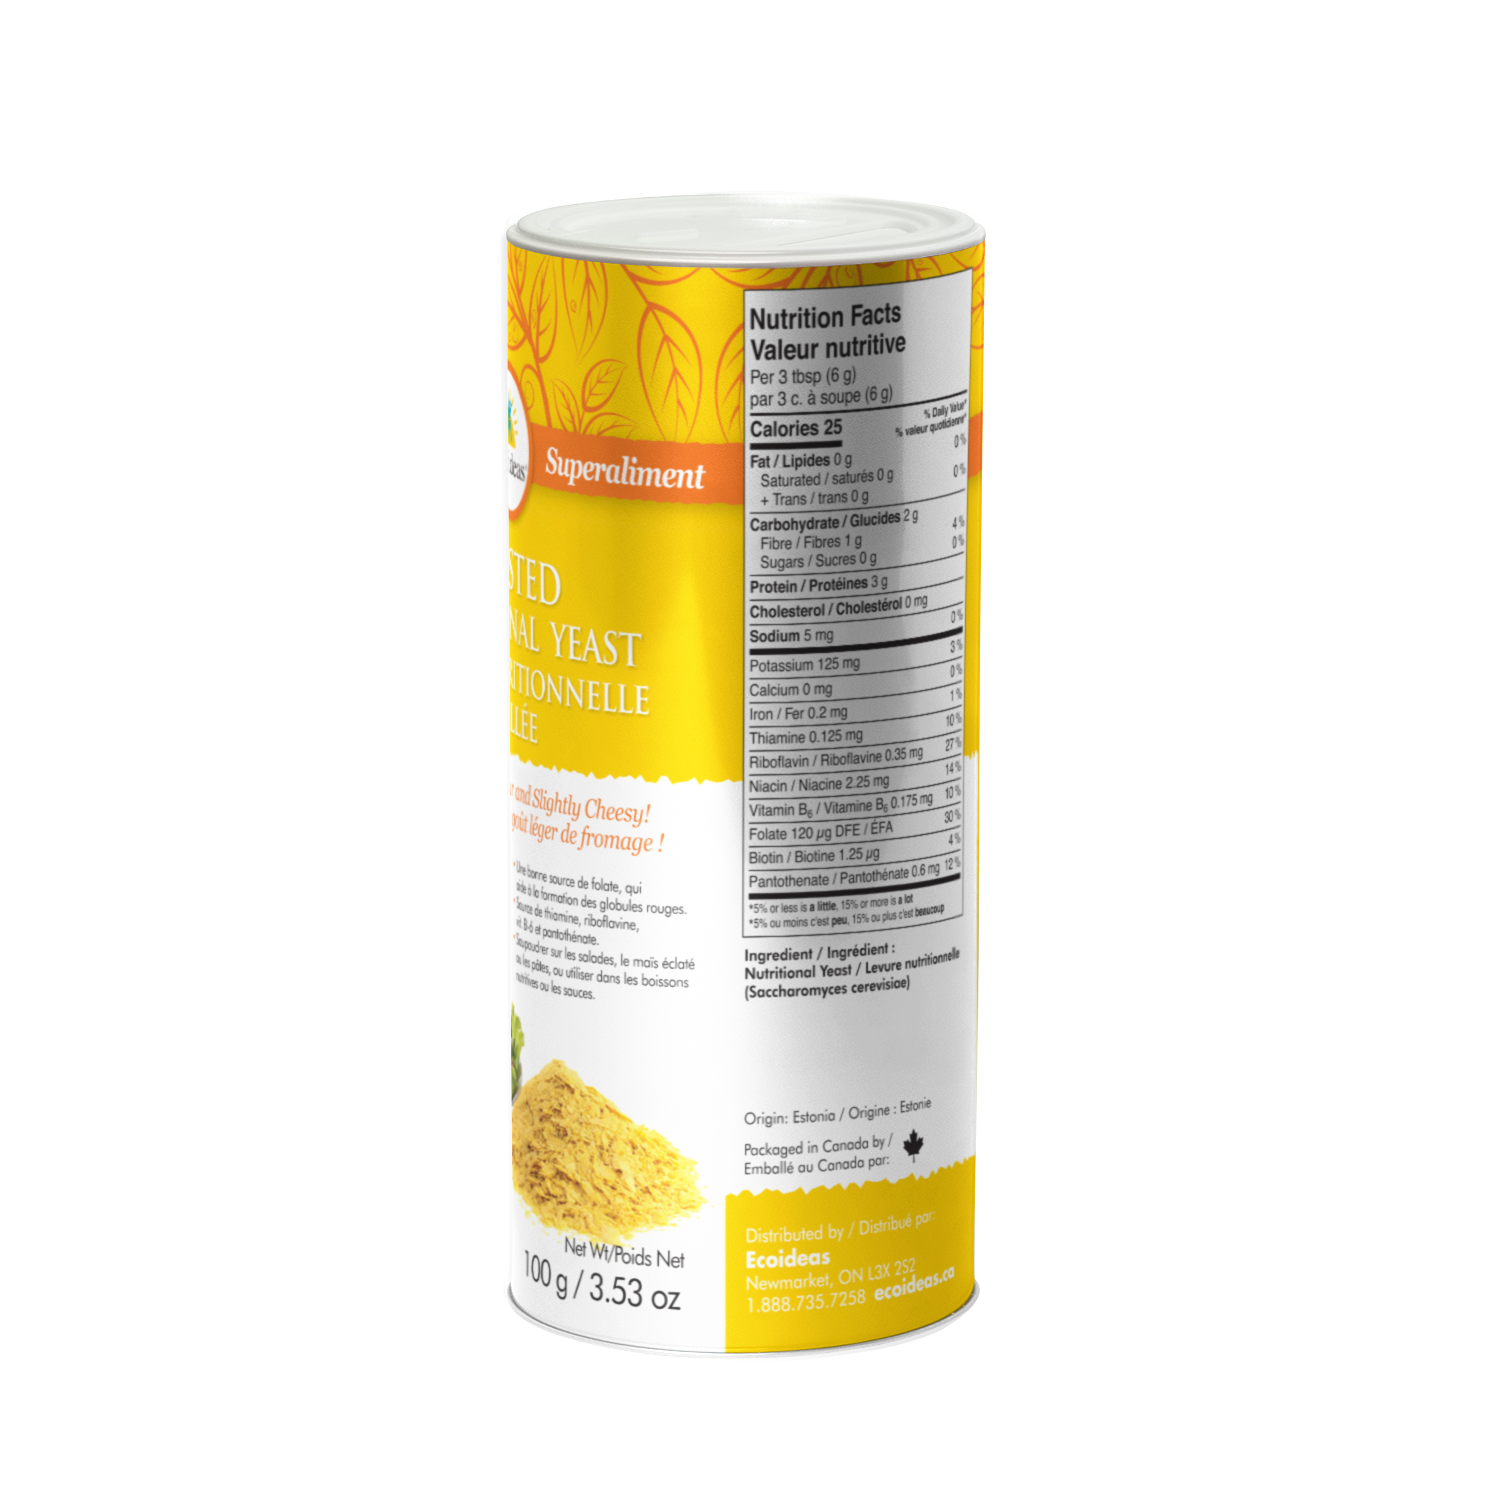 Toasted Nutritional yeast Shaker - (100g)